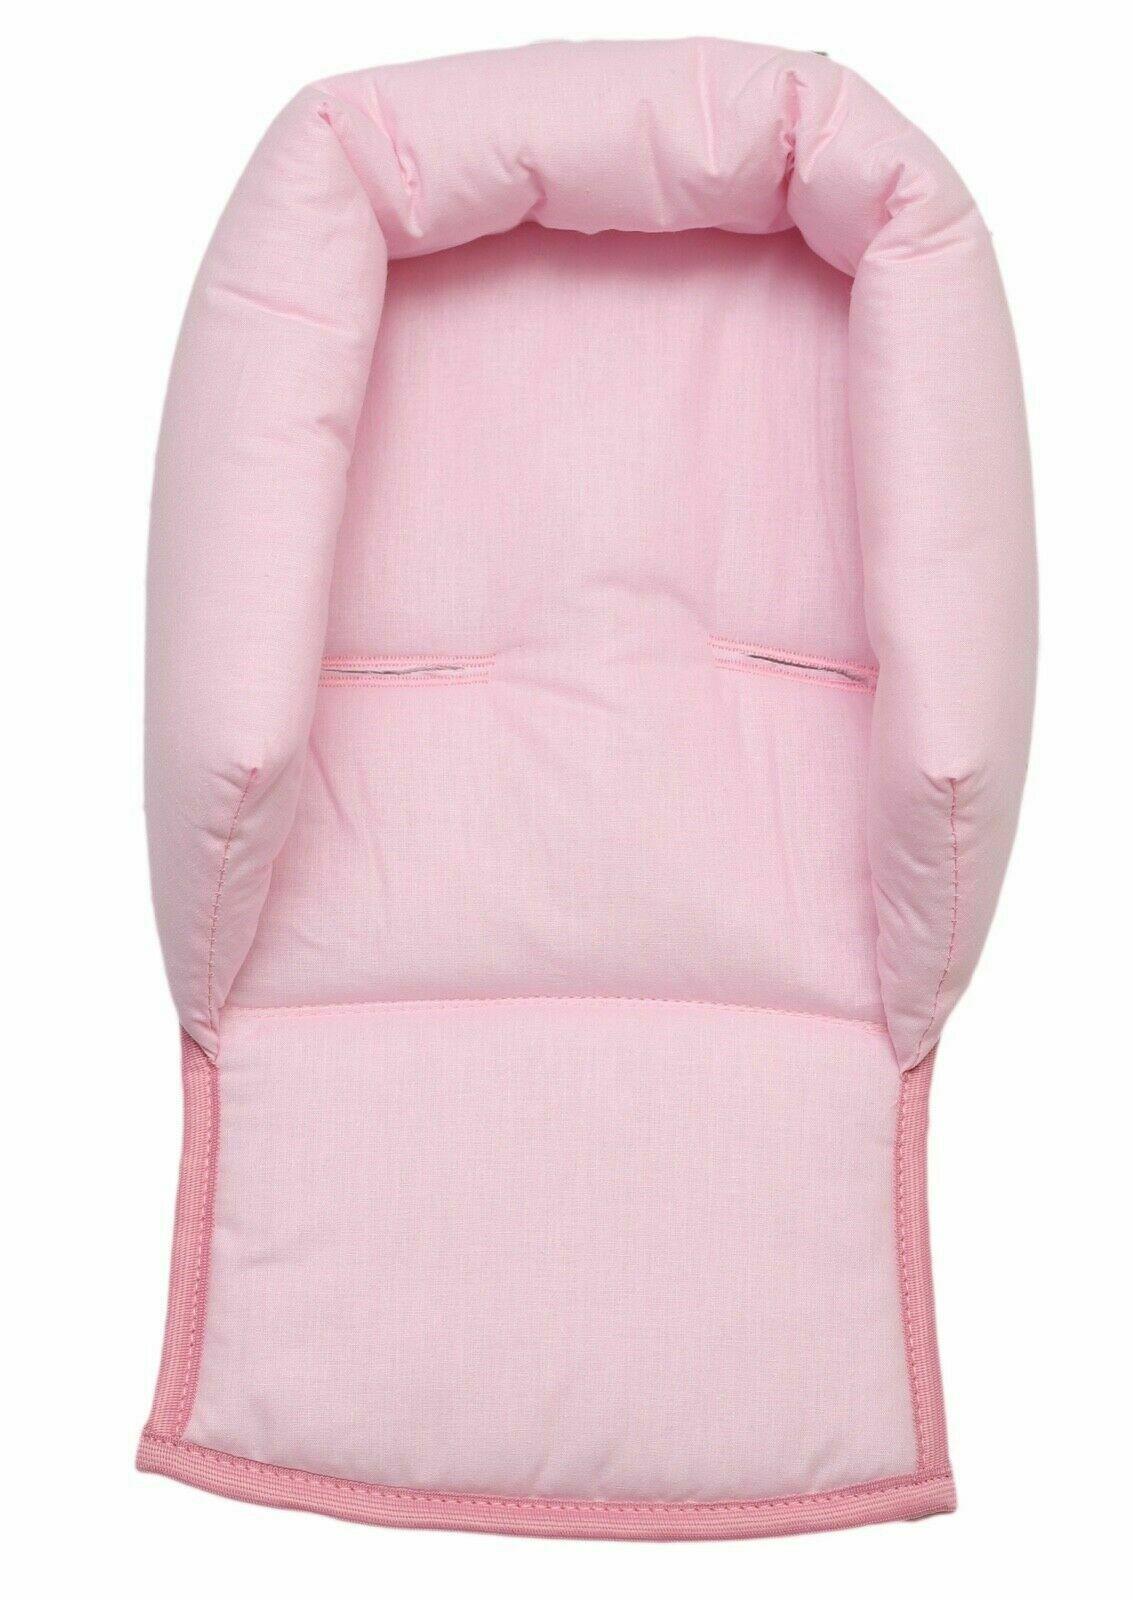 Baby Head Car Seat Rest Cushion Toddler Child Support Pillow Light Pink